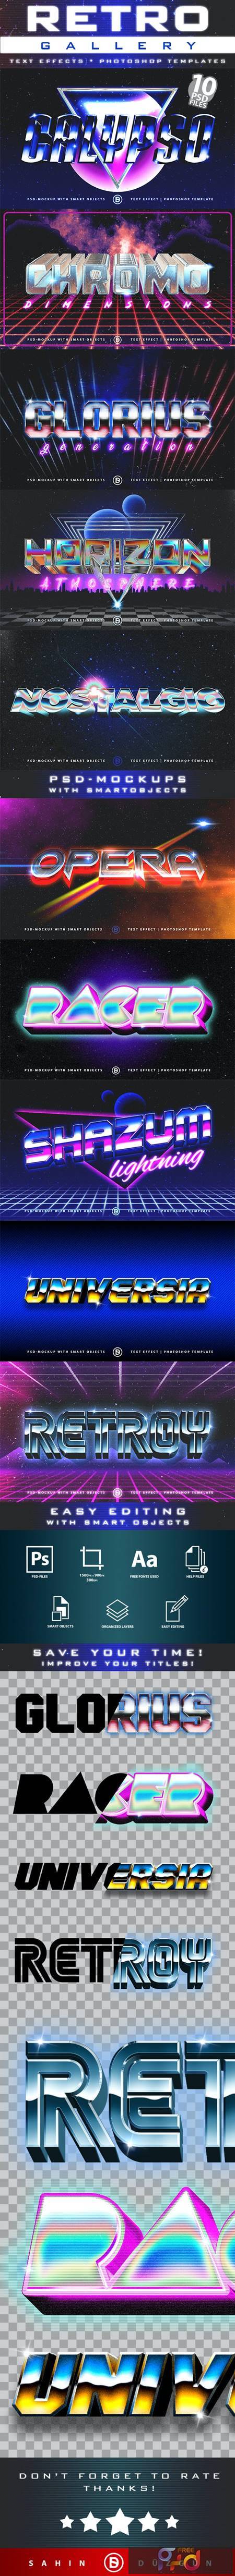 80s Retro Gallery - Text Effects Mockups - Template Package 27199191 1